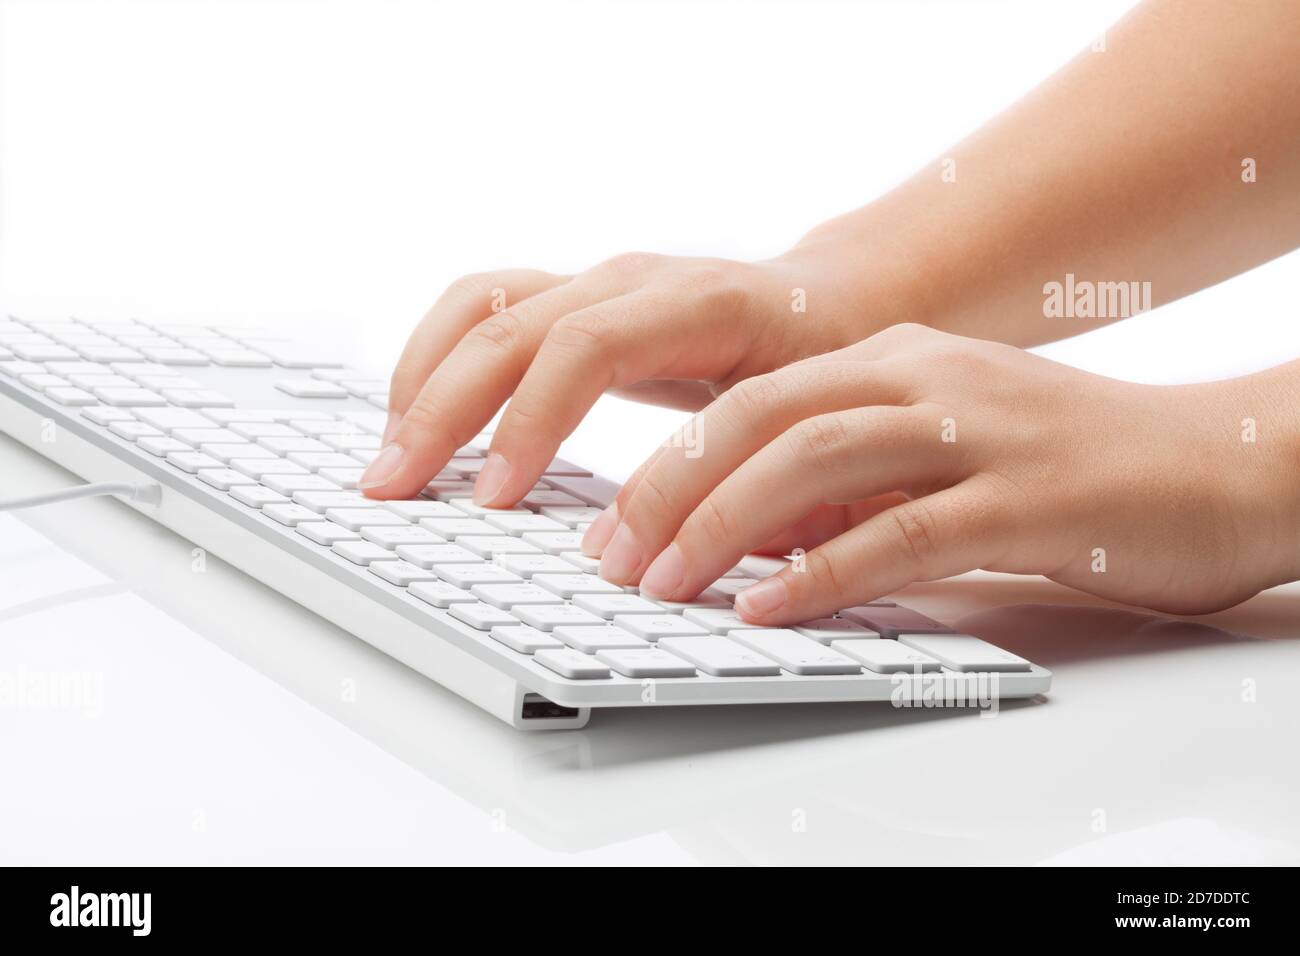 Young woman typing on keyboard. Smooth light against white background Stock Photo